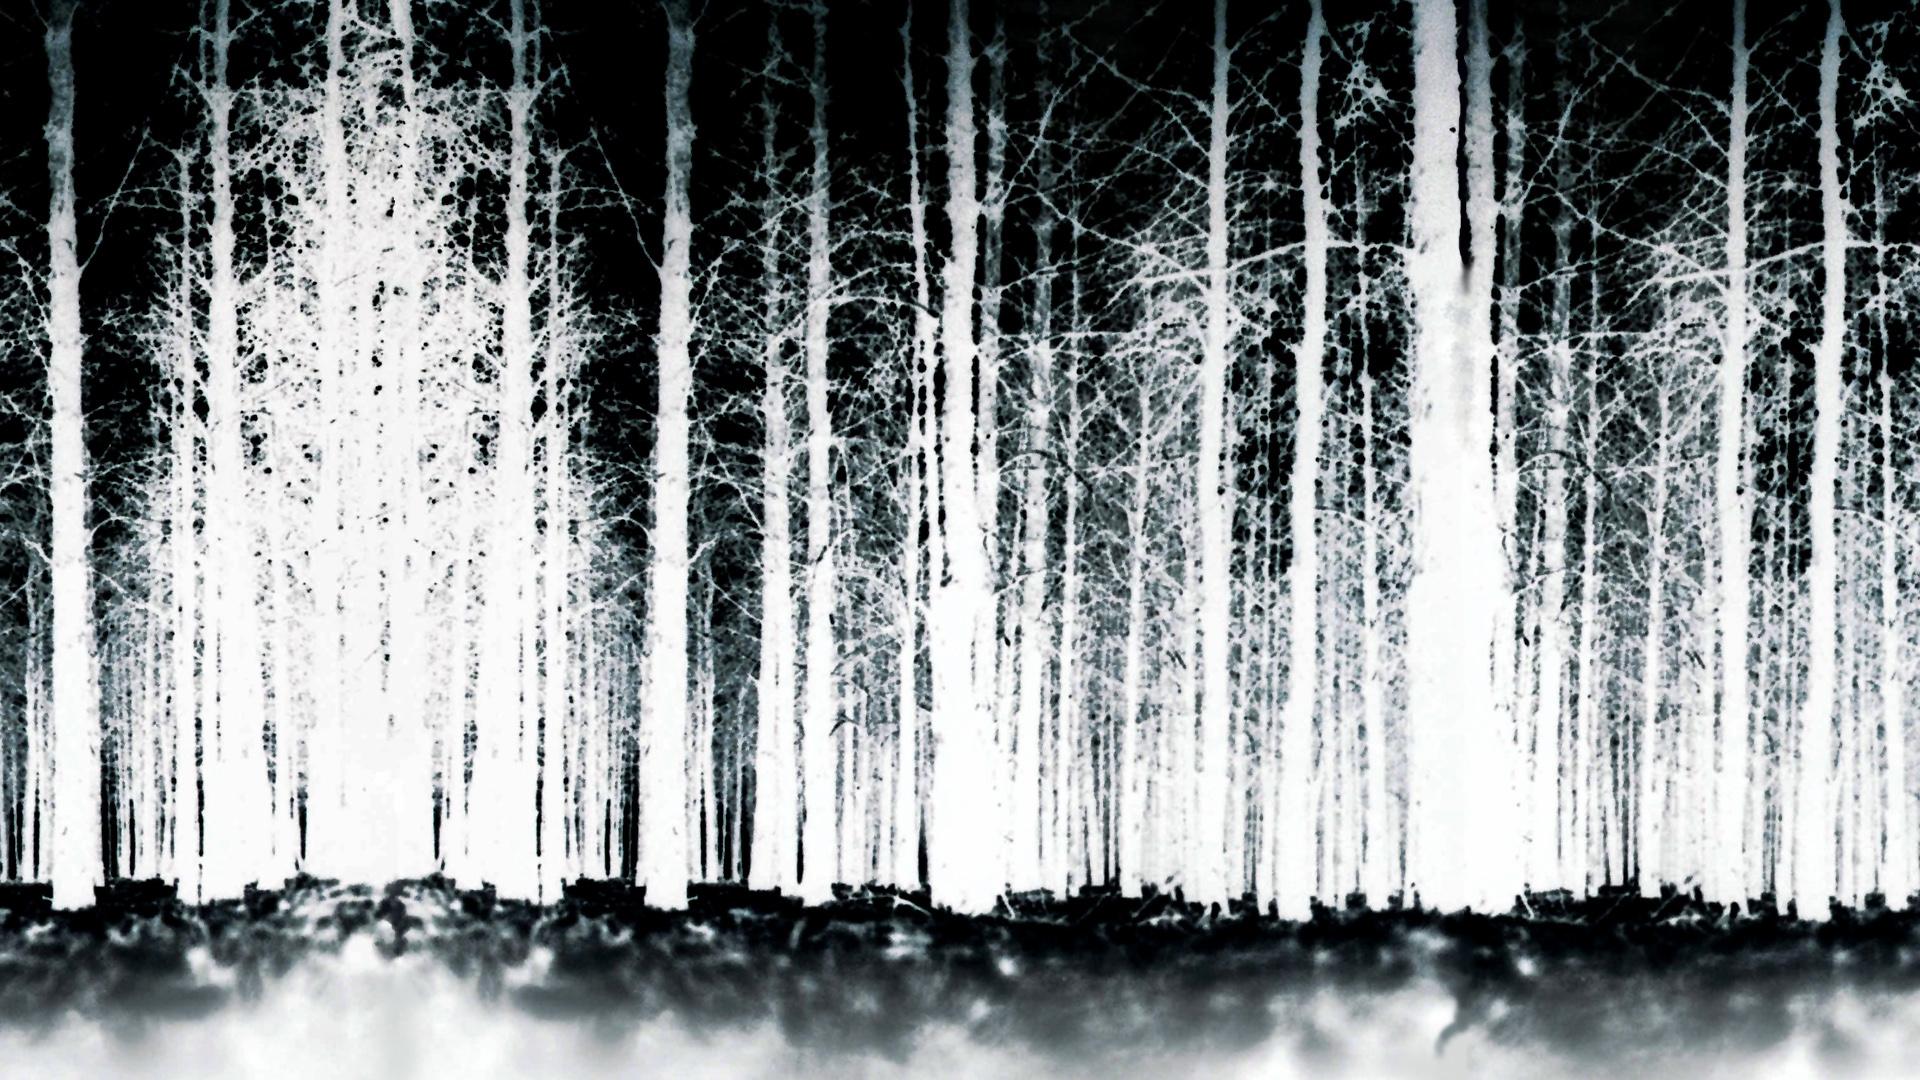 The Blair Witch Project Movie Wallpaper image in Collection